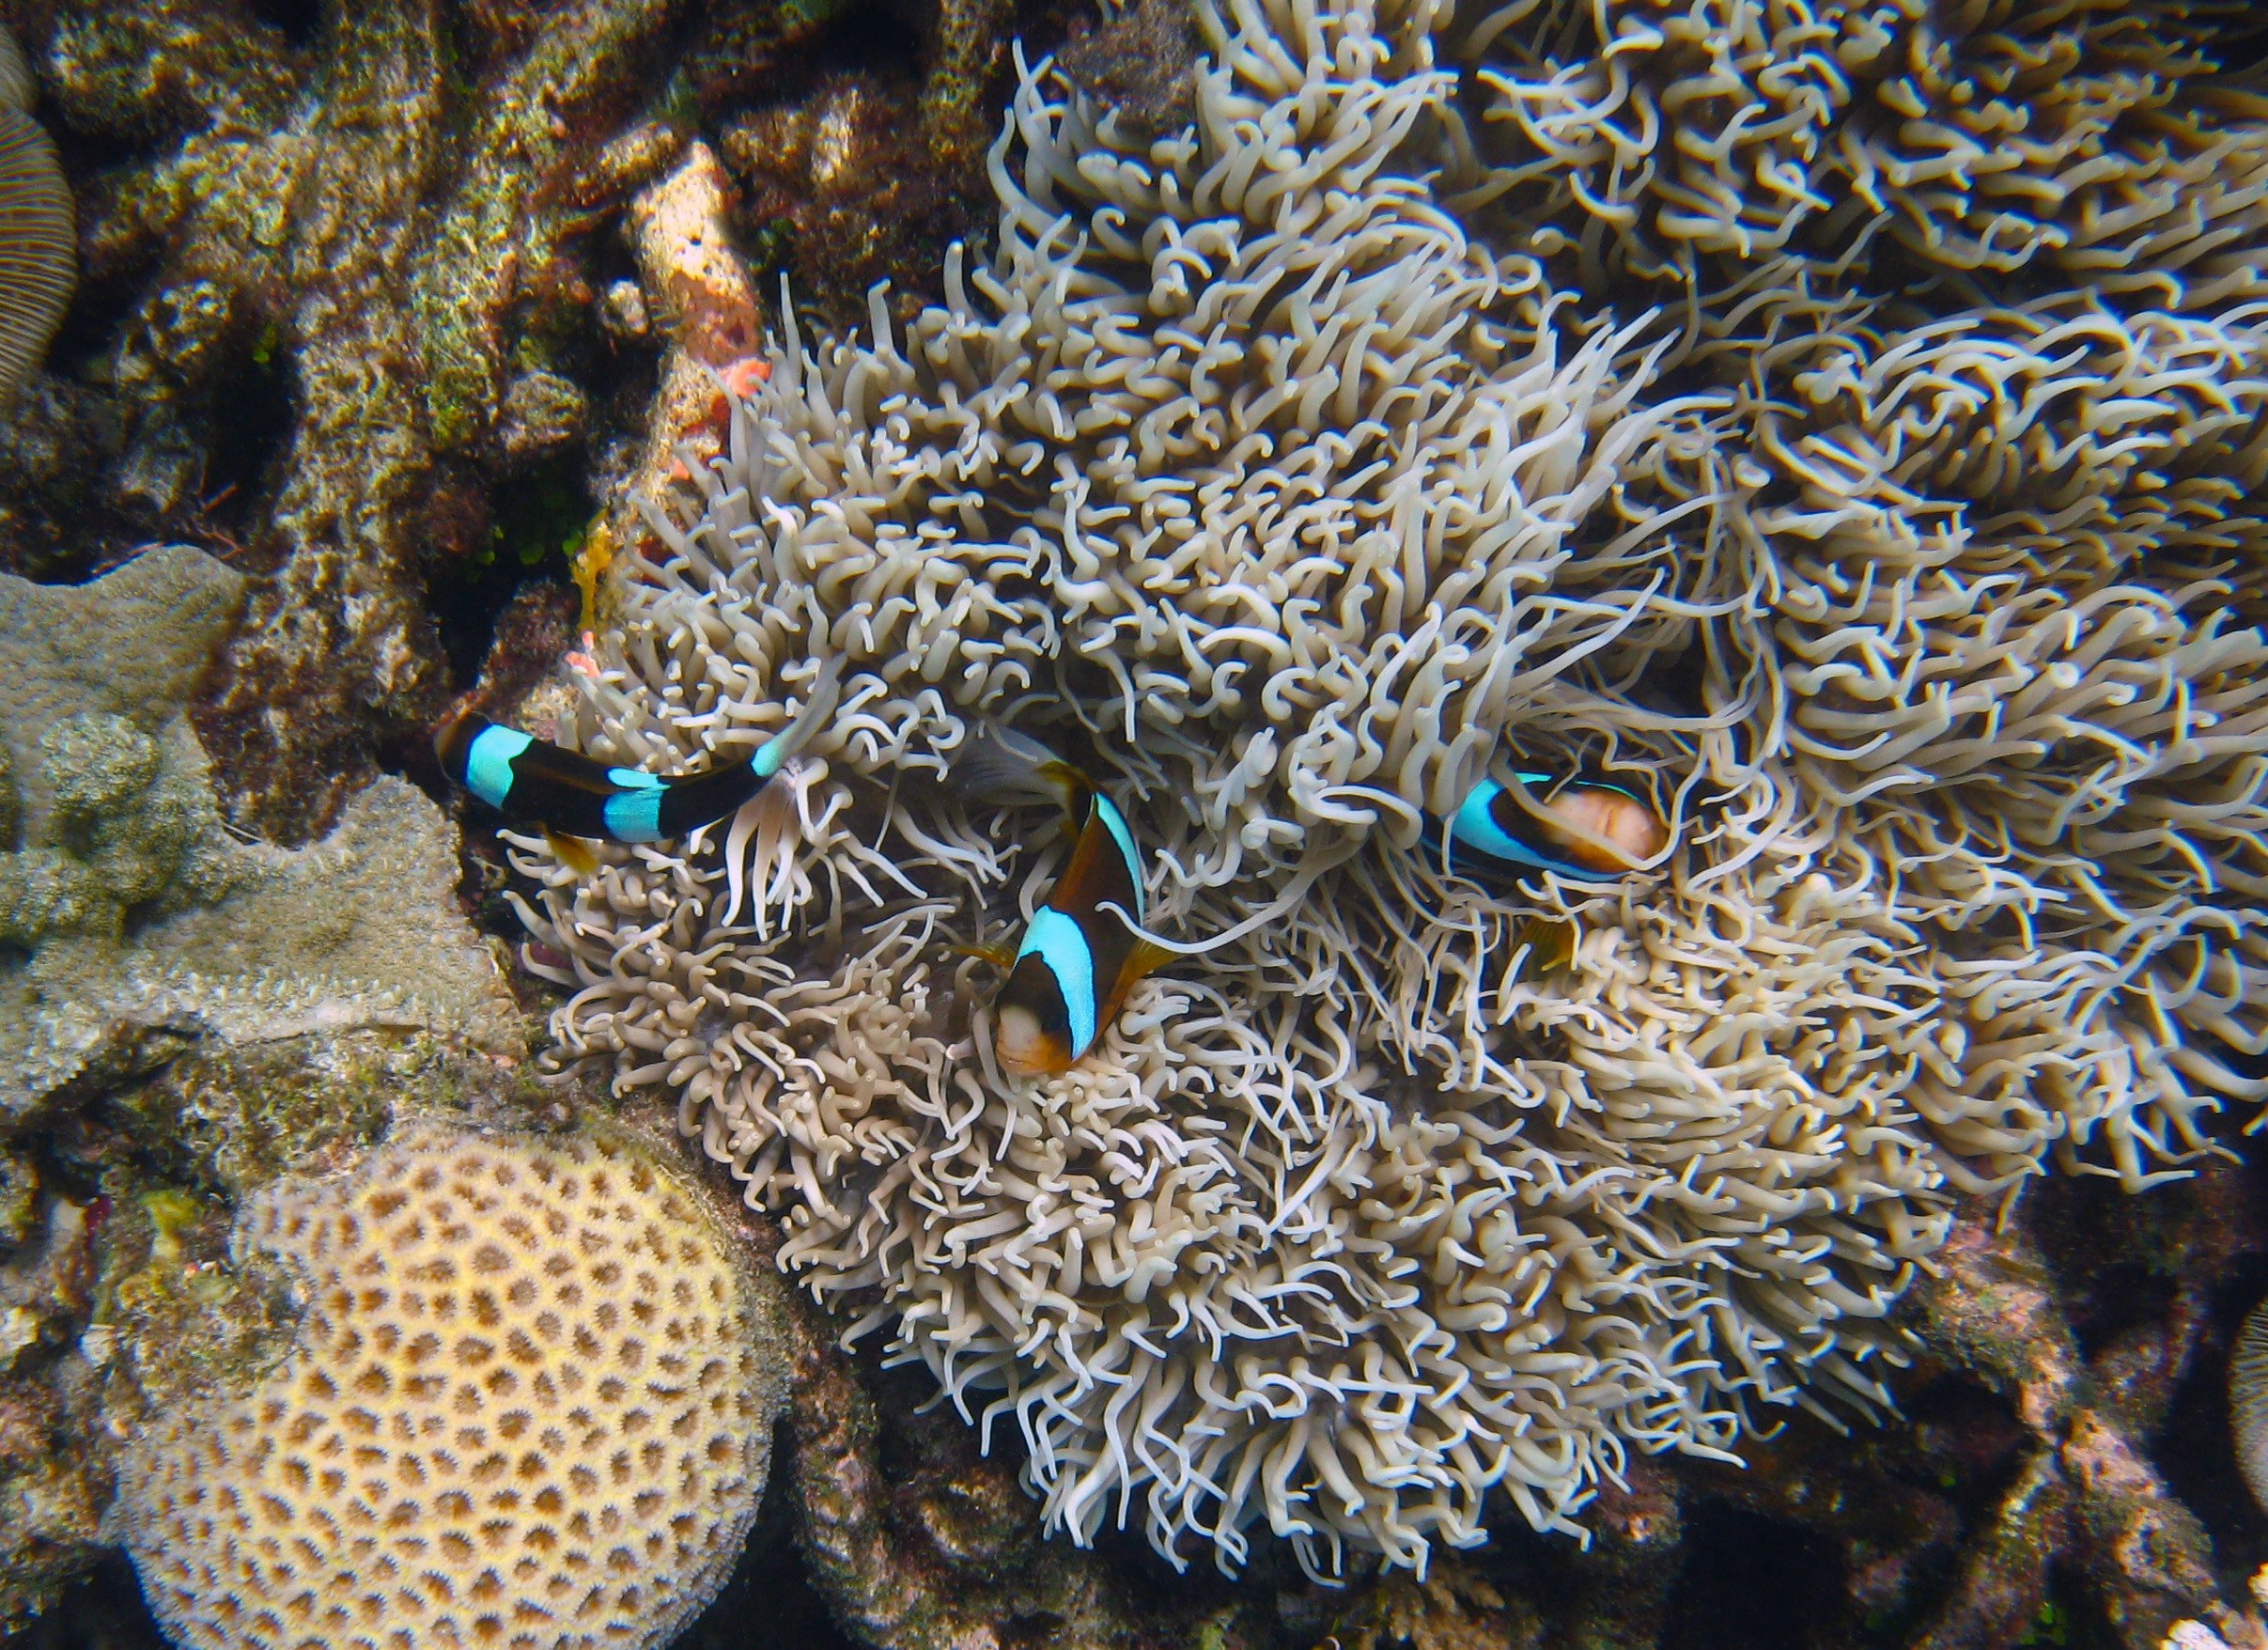 Clownfish and sea anemone at the Great Barrier Reef 